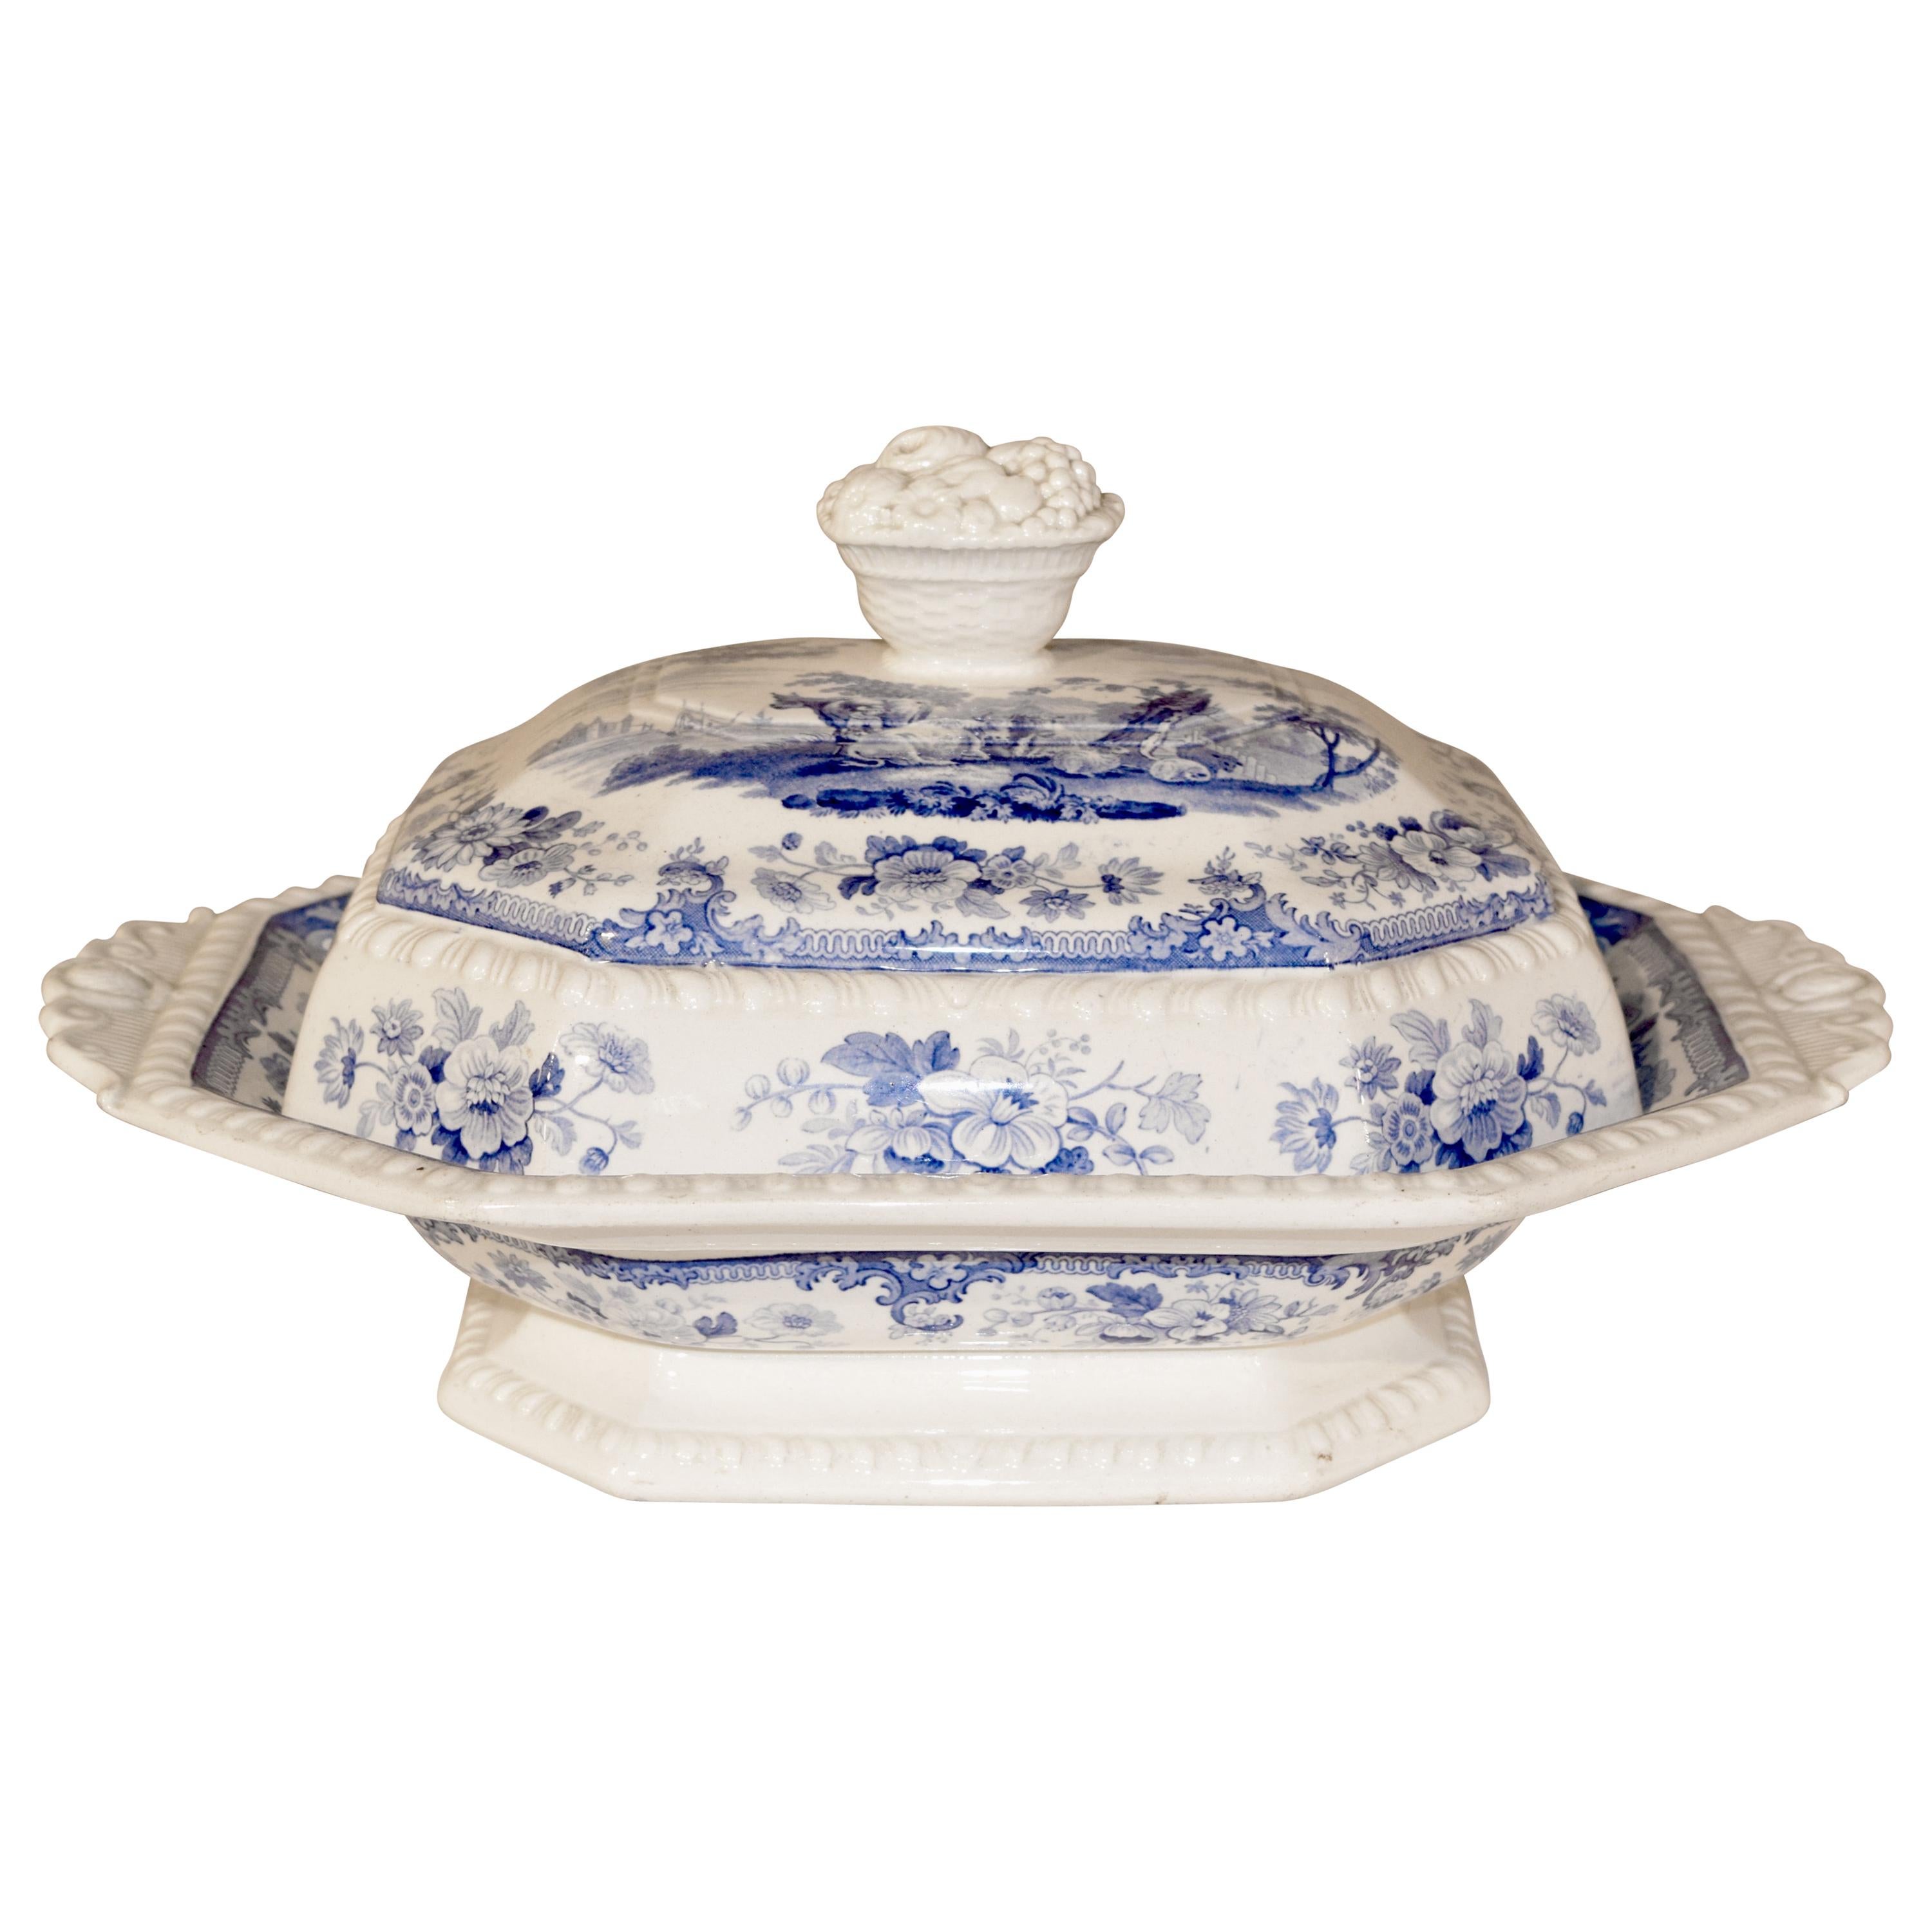 19th Century Staffordshire Covered Vegetable Dish